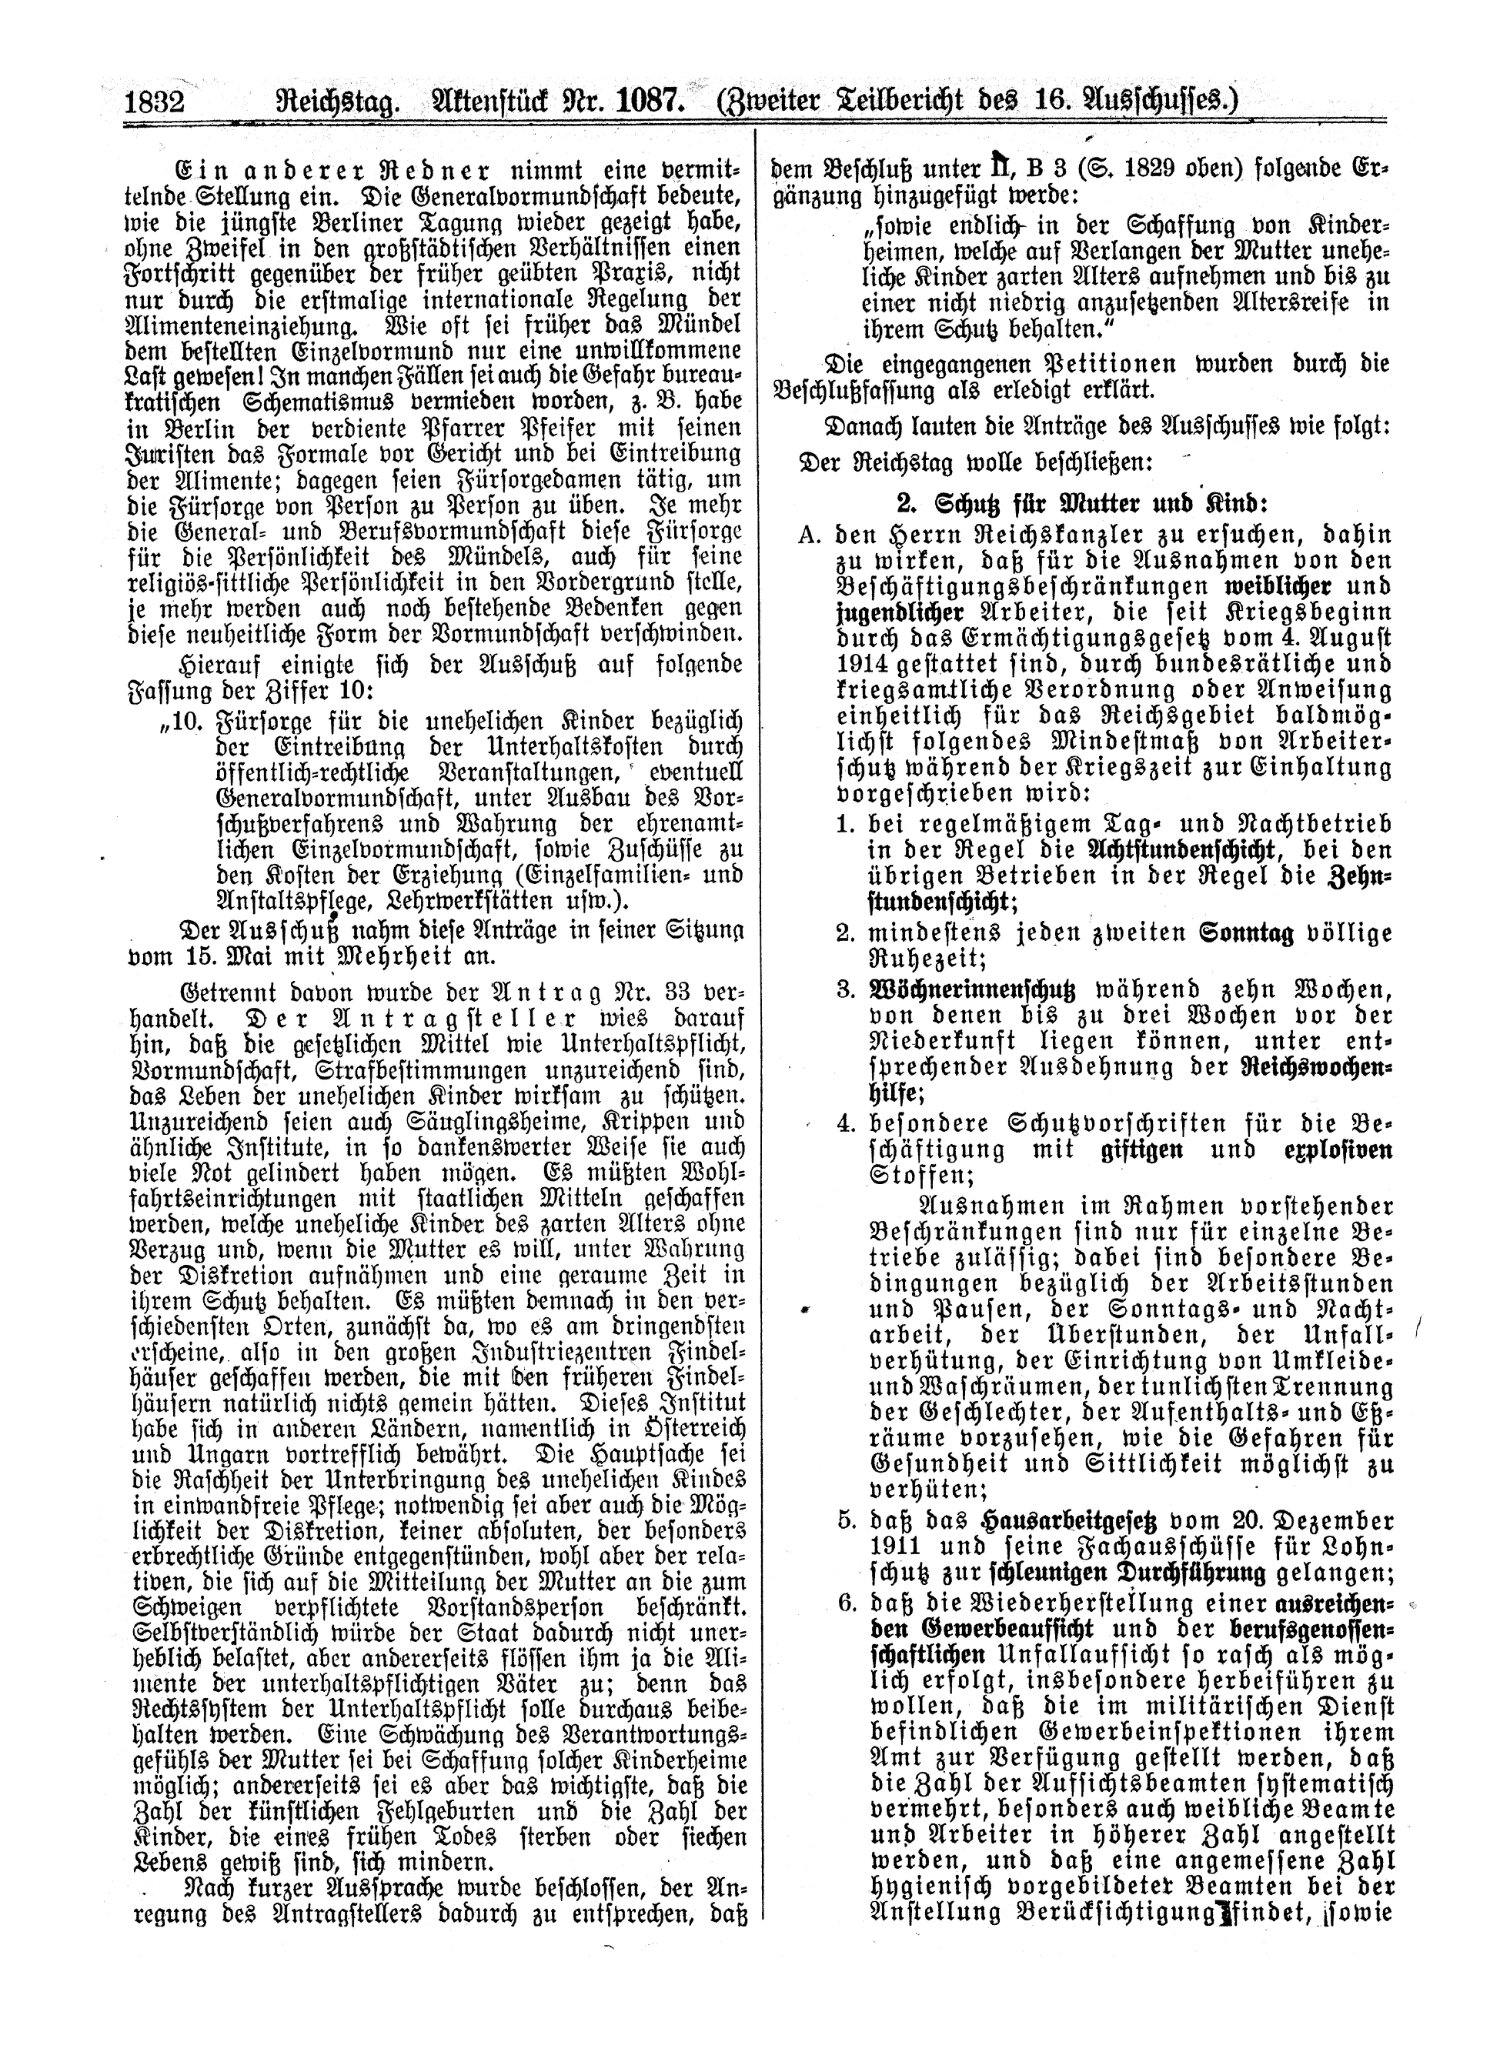 Scan of page 1832